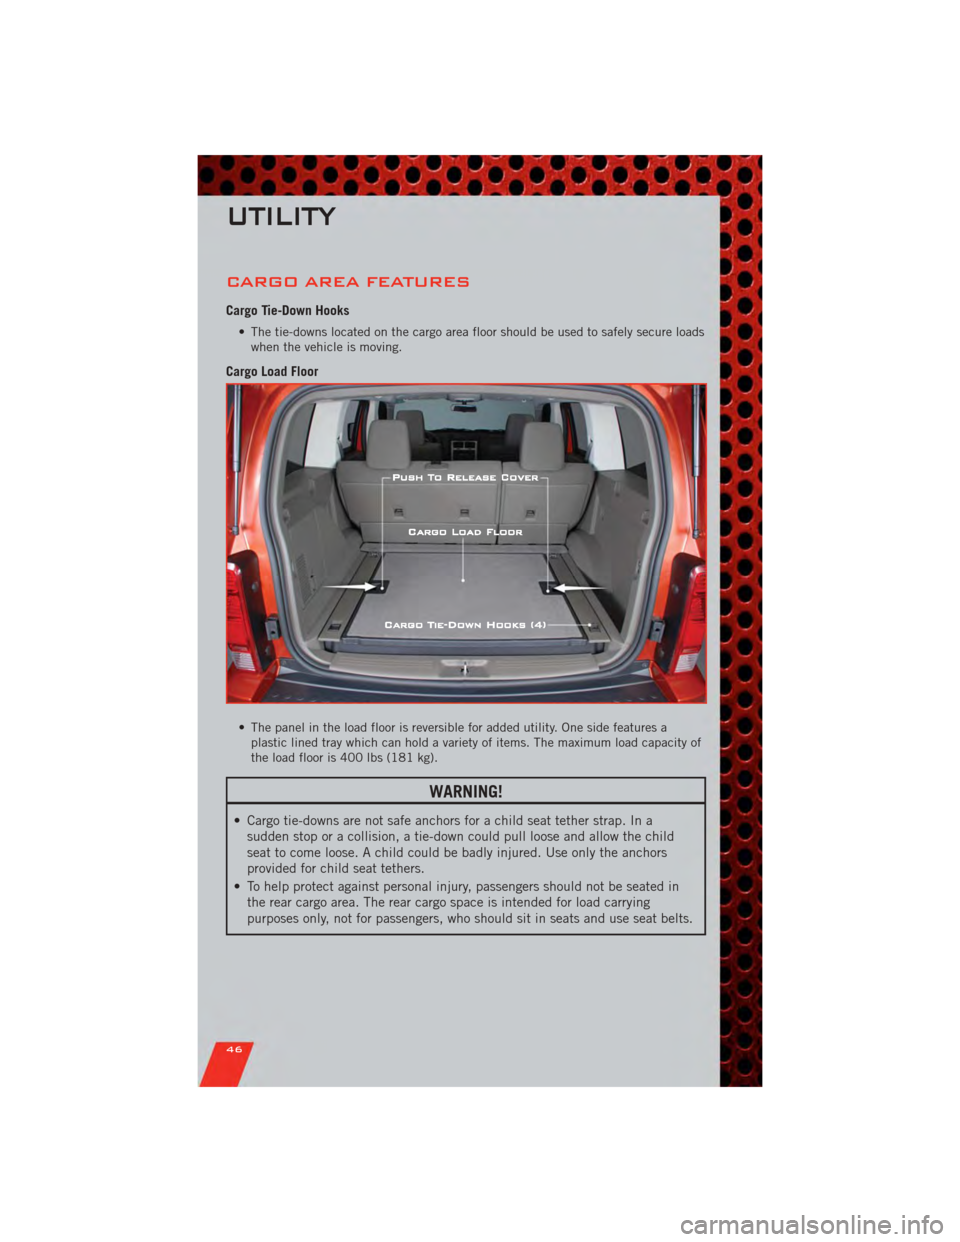 DODGE NITRO 2011 1.G Service Manual CARGO AREA FEATURES
Cargo Tie-Down Hooks
• The tie-downs located on the cargo area floor should be used to safely secure loadswhen the vehicle is moving.
Cargo Load Floor
• The panel in the load f